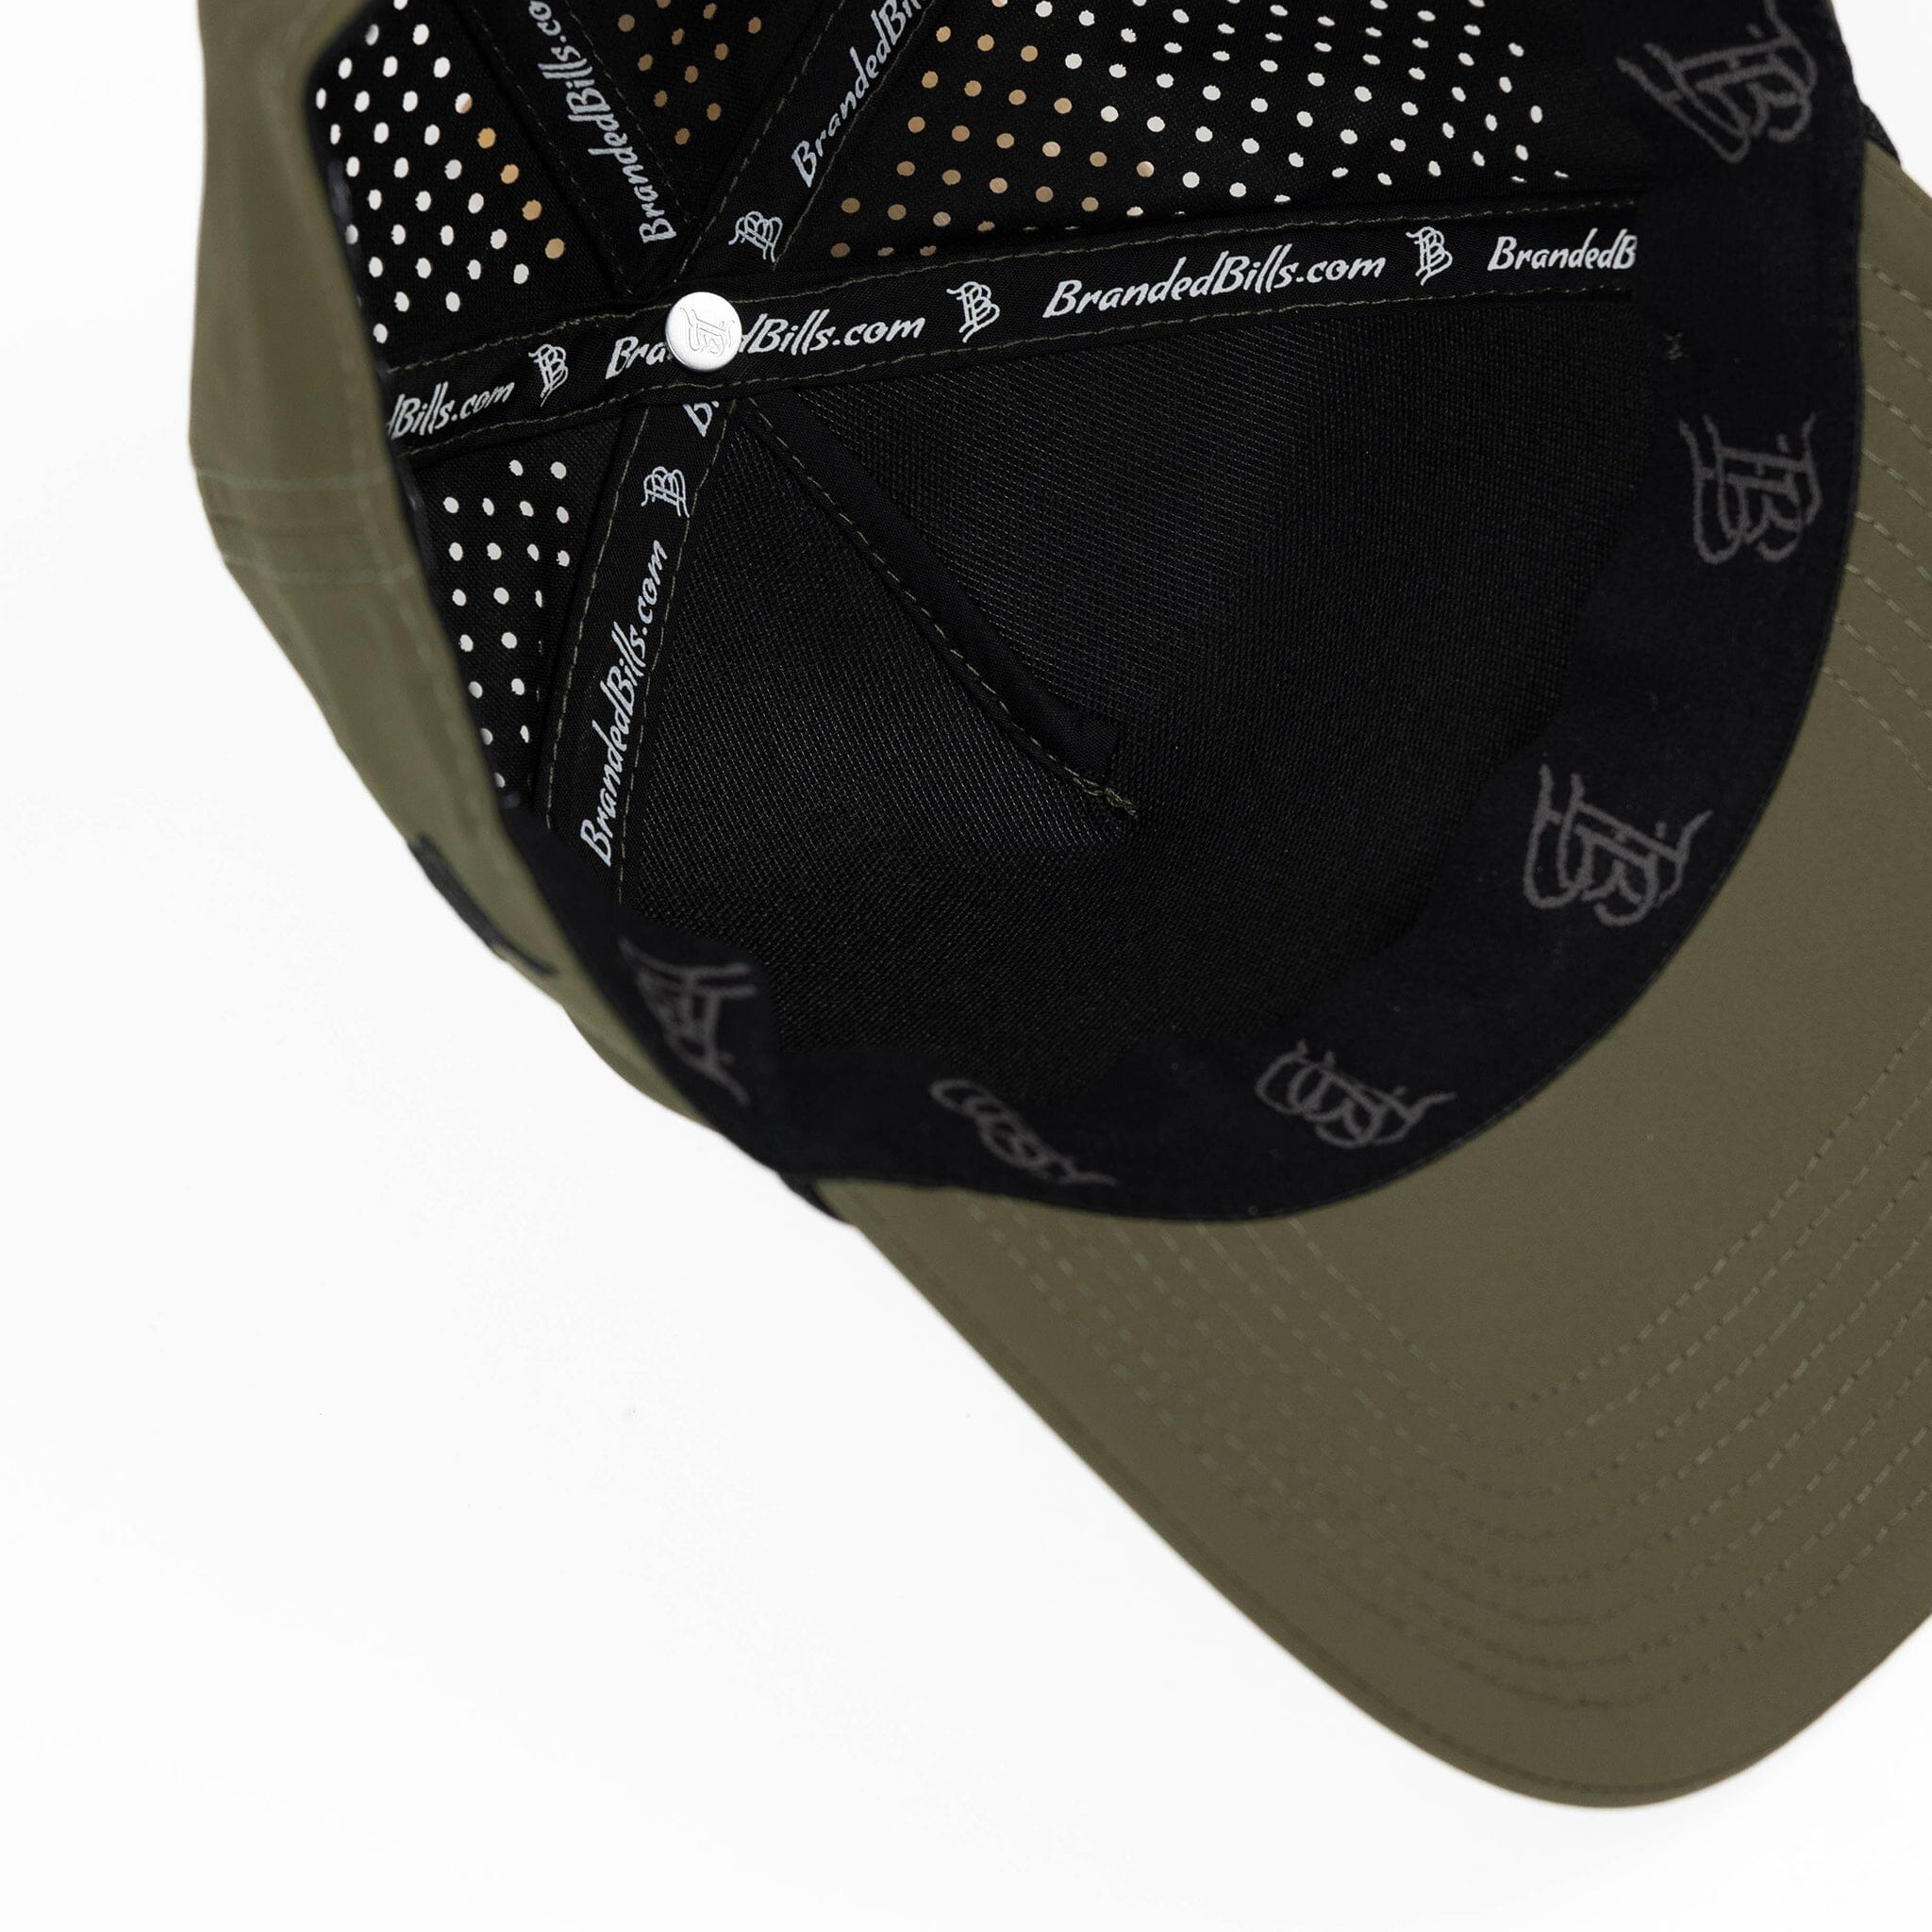 Party Eagle PVC Curved 5 Panel Performance Inside Loden/Black